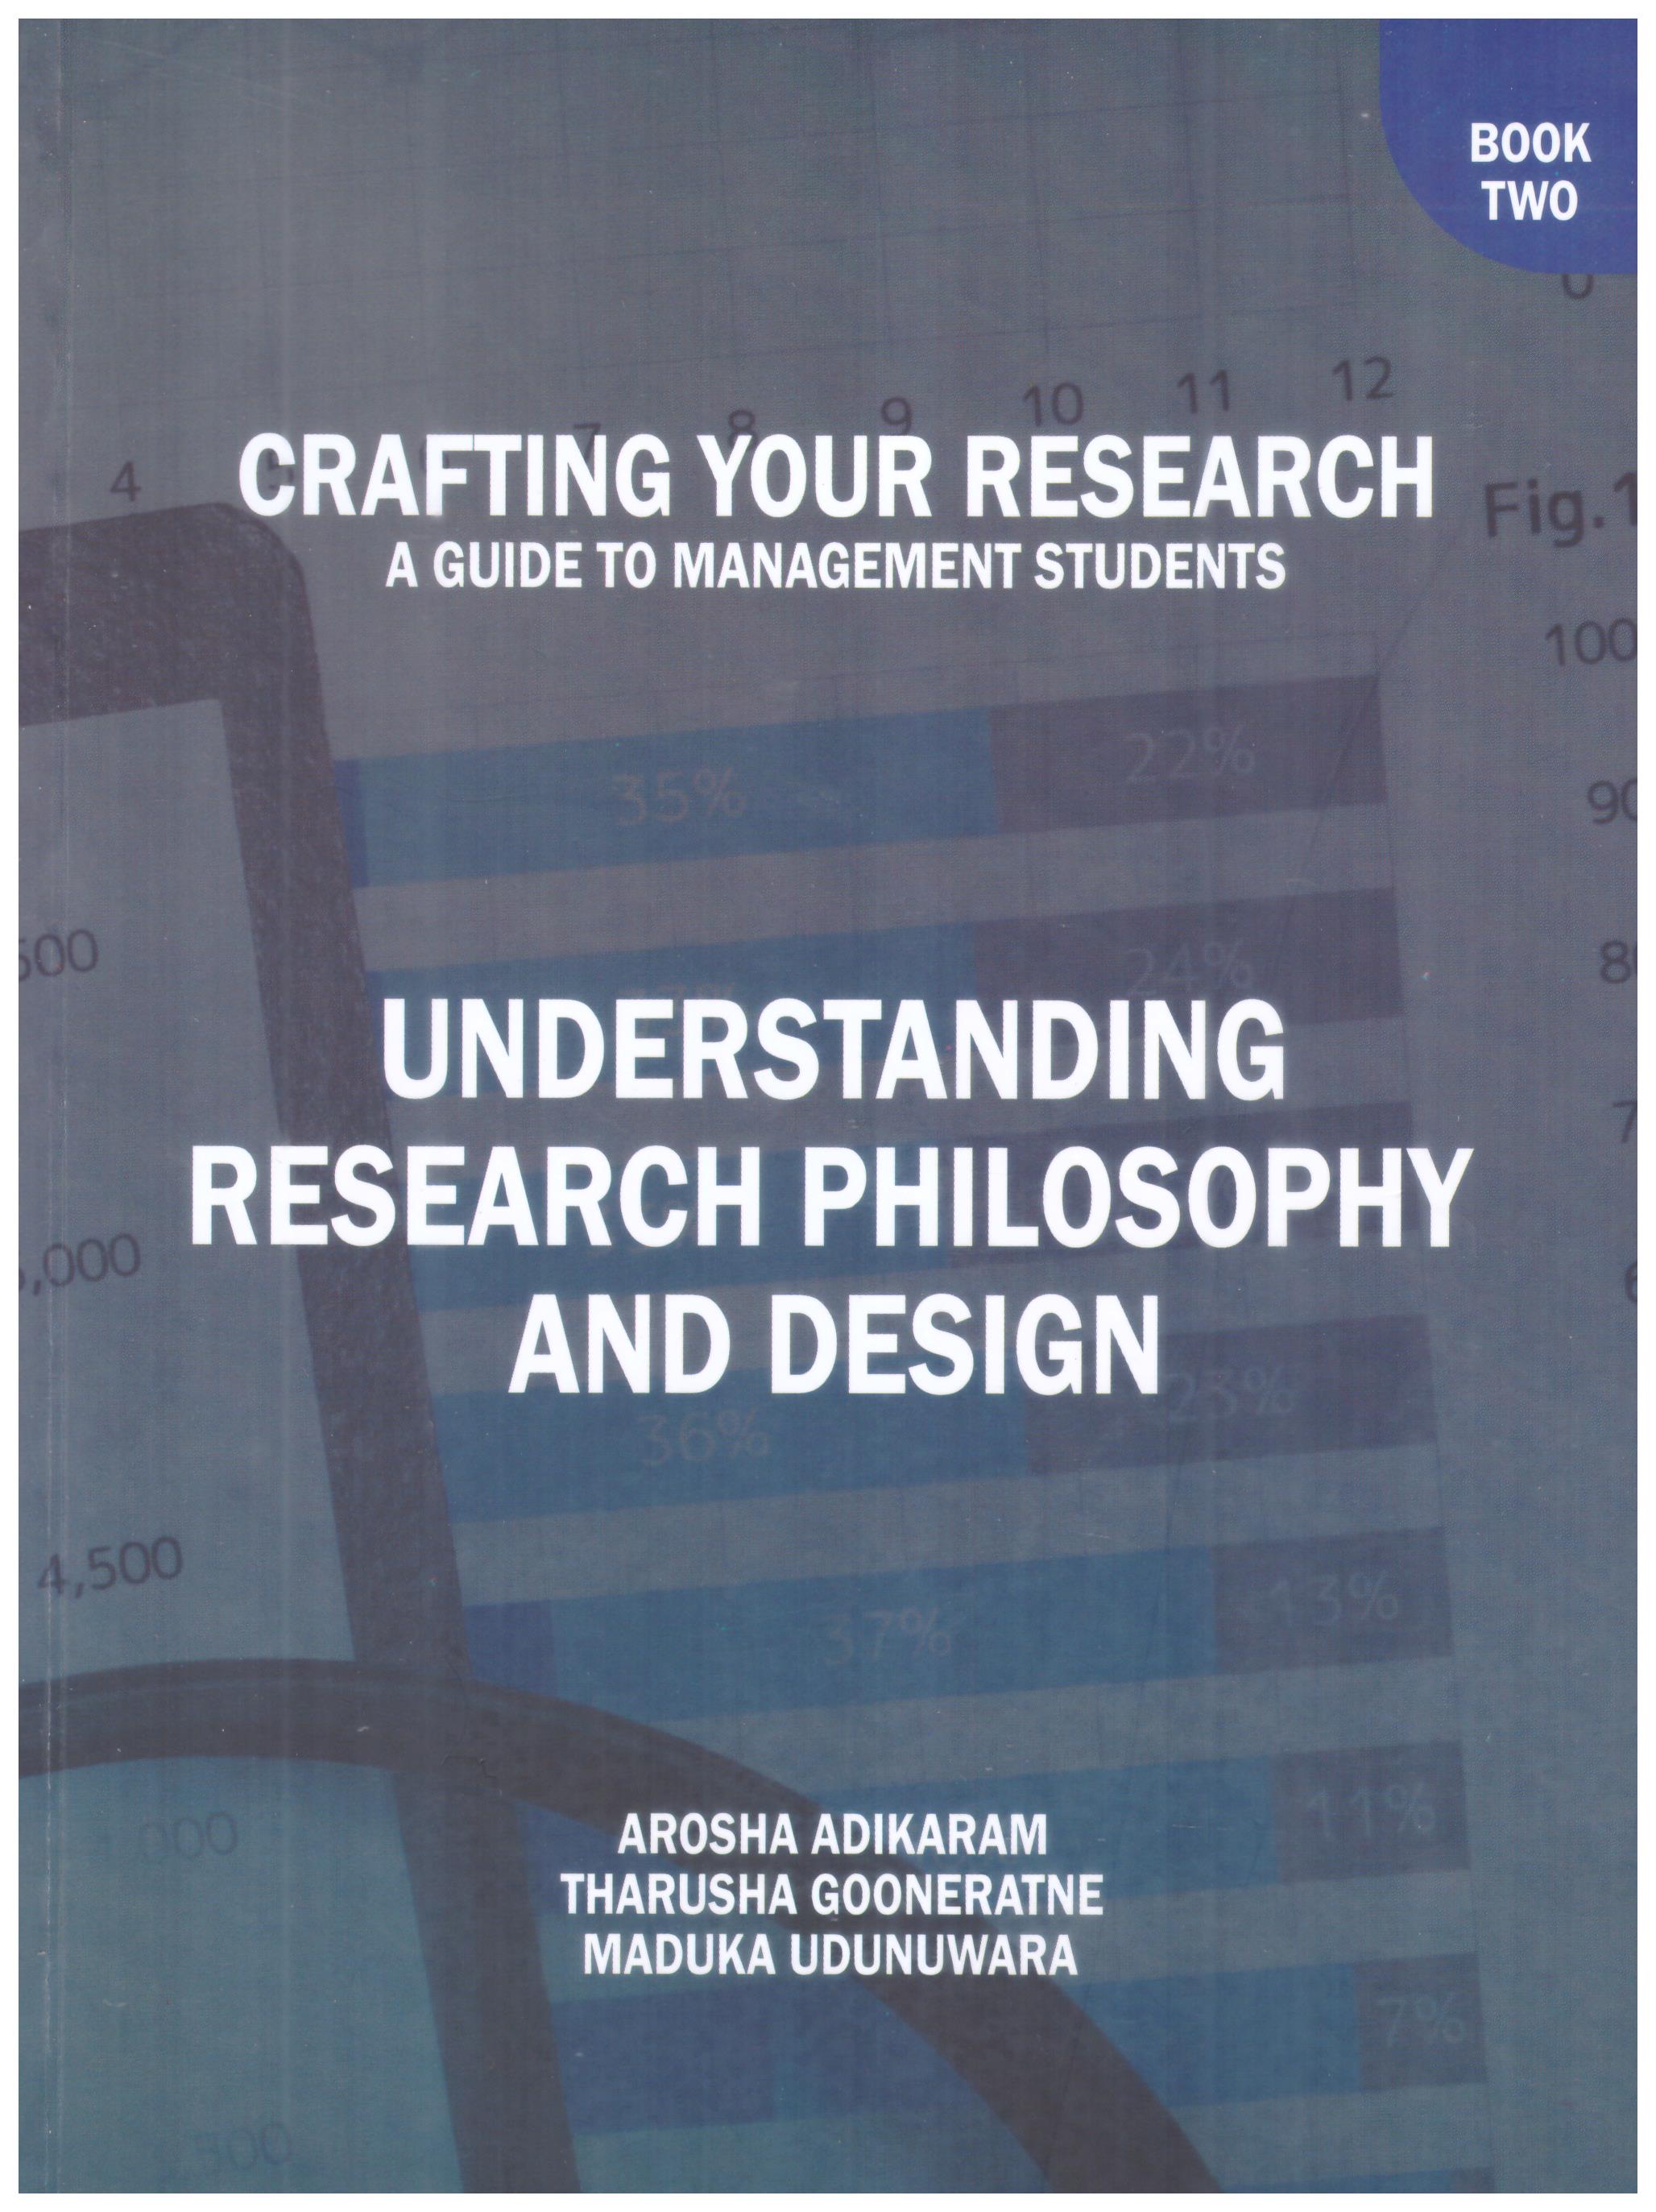 Crafting Your Research : A Guide to Management Students : Understanding  Research Philosophy And Desing Book Two